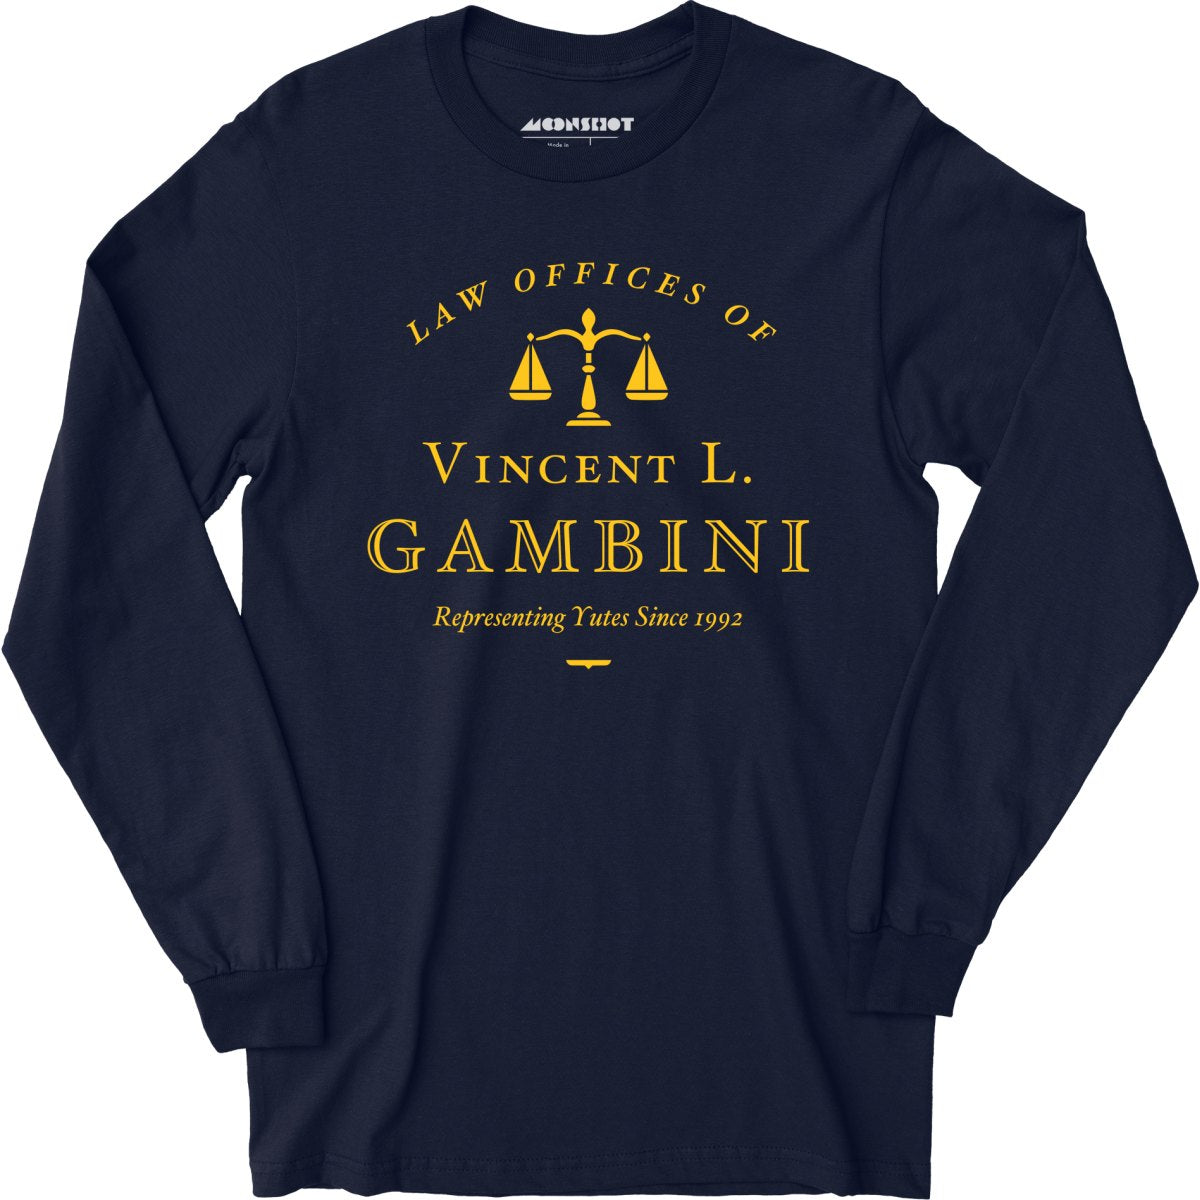 Law Offices of Vincent L. Gambini - Long Sleeve T-Shirt